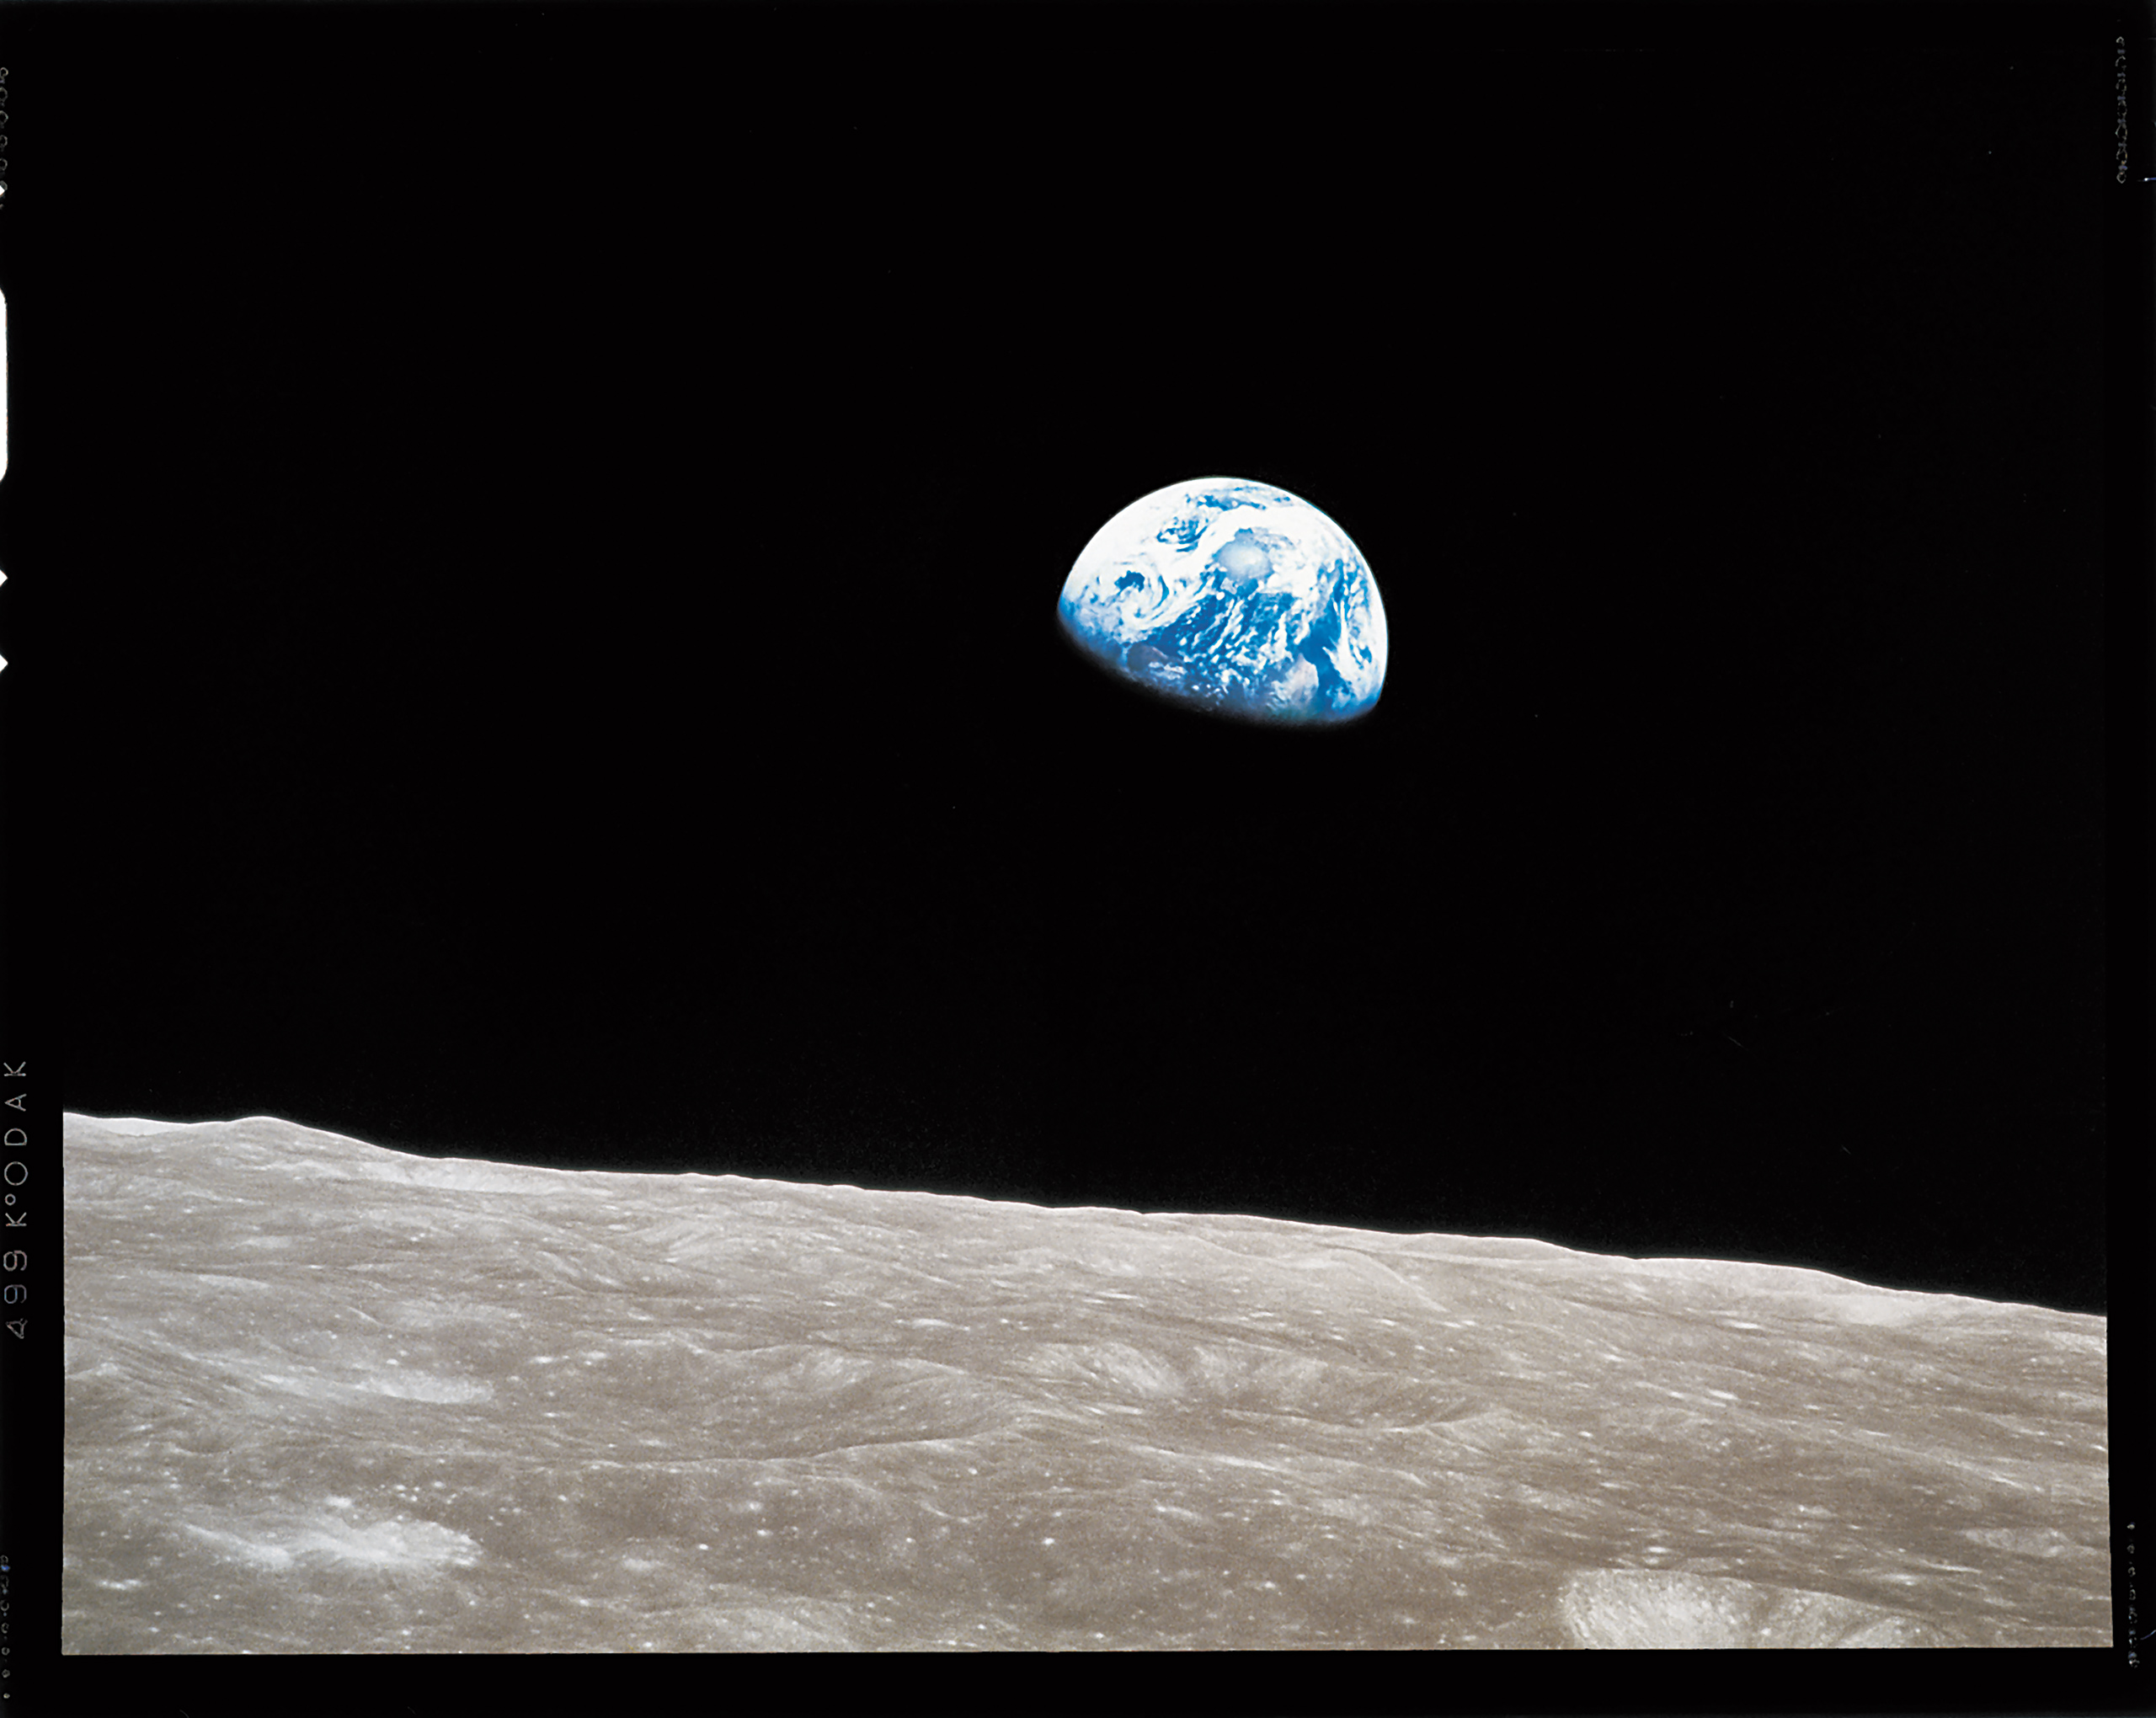 The Earth seen from the surface of the moon during Apollo 8, the first manned mission to the moon.